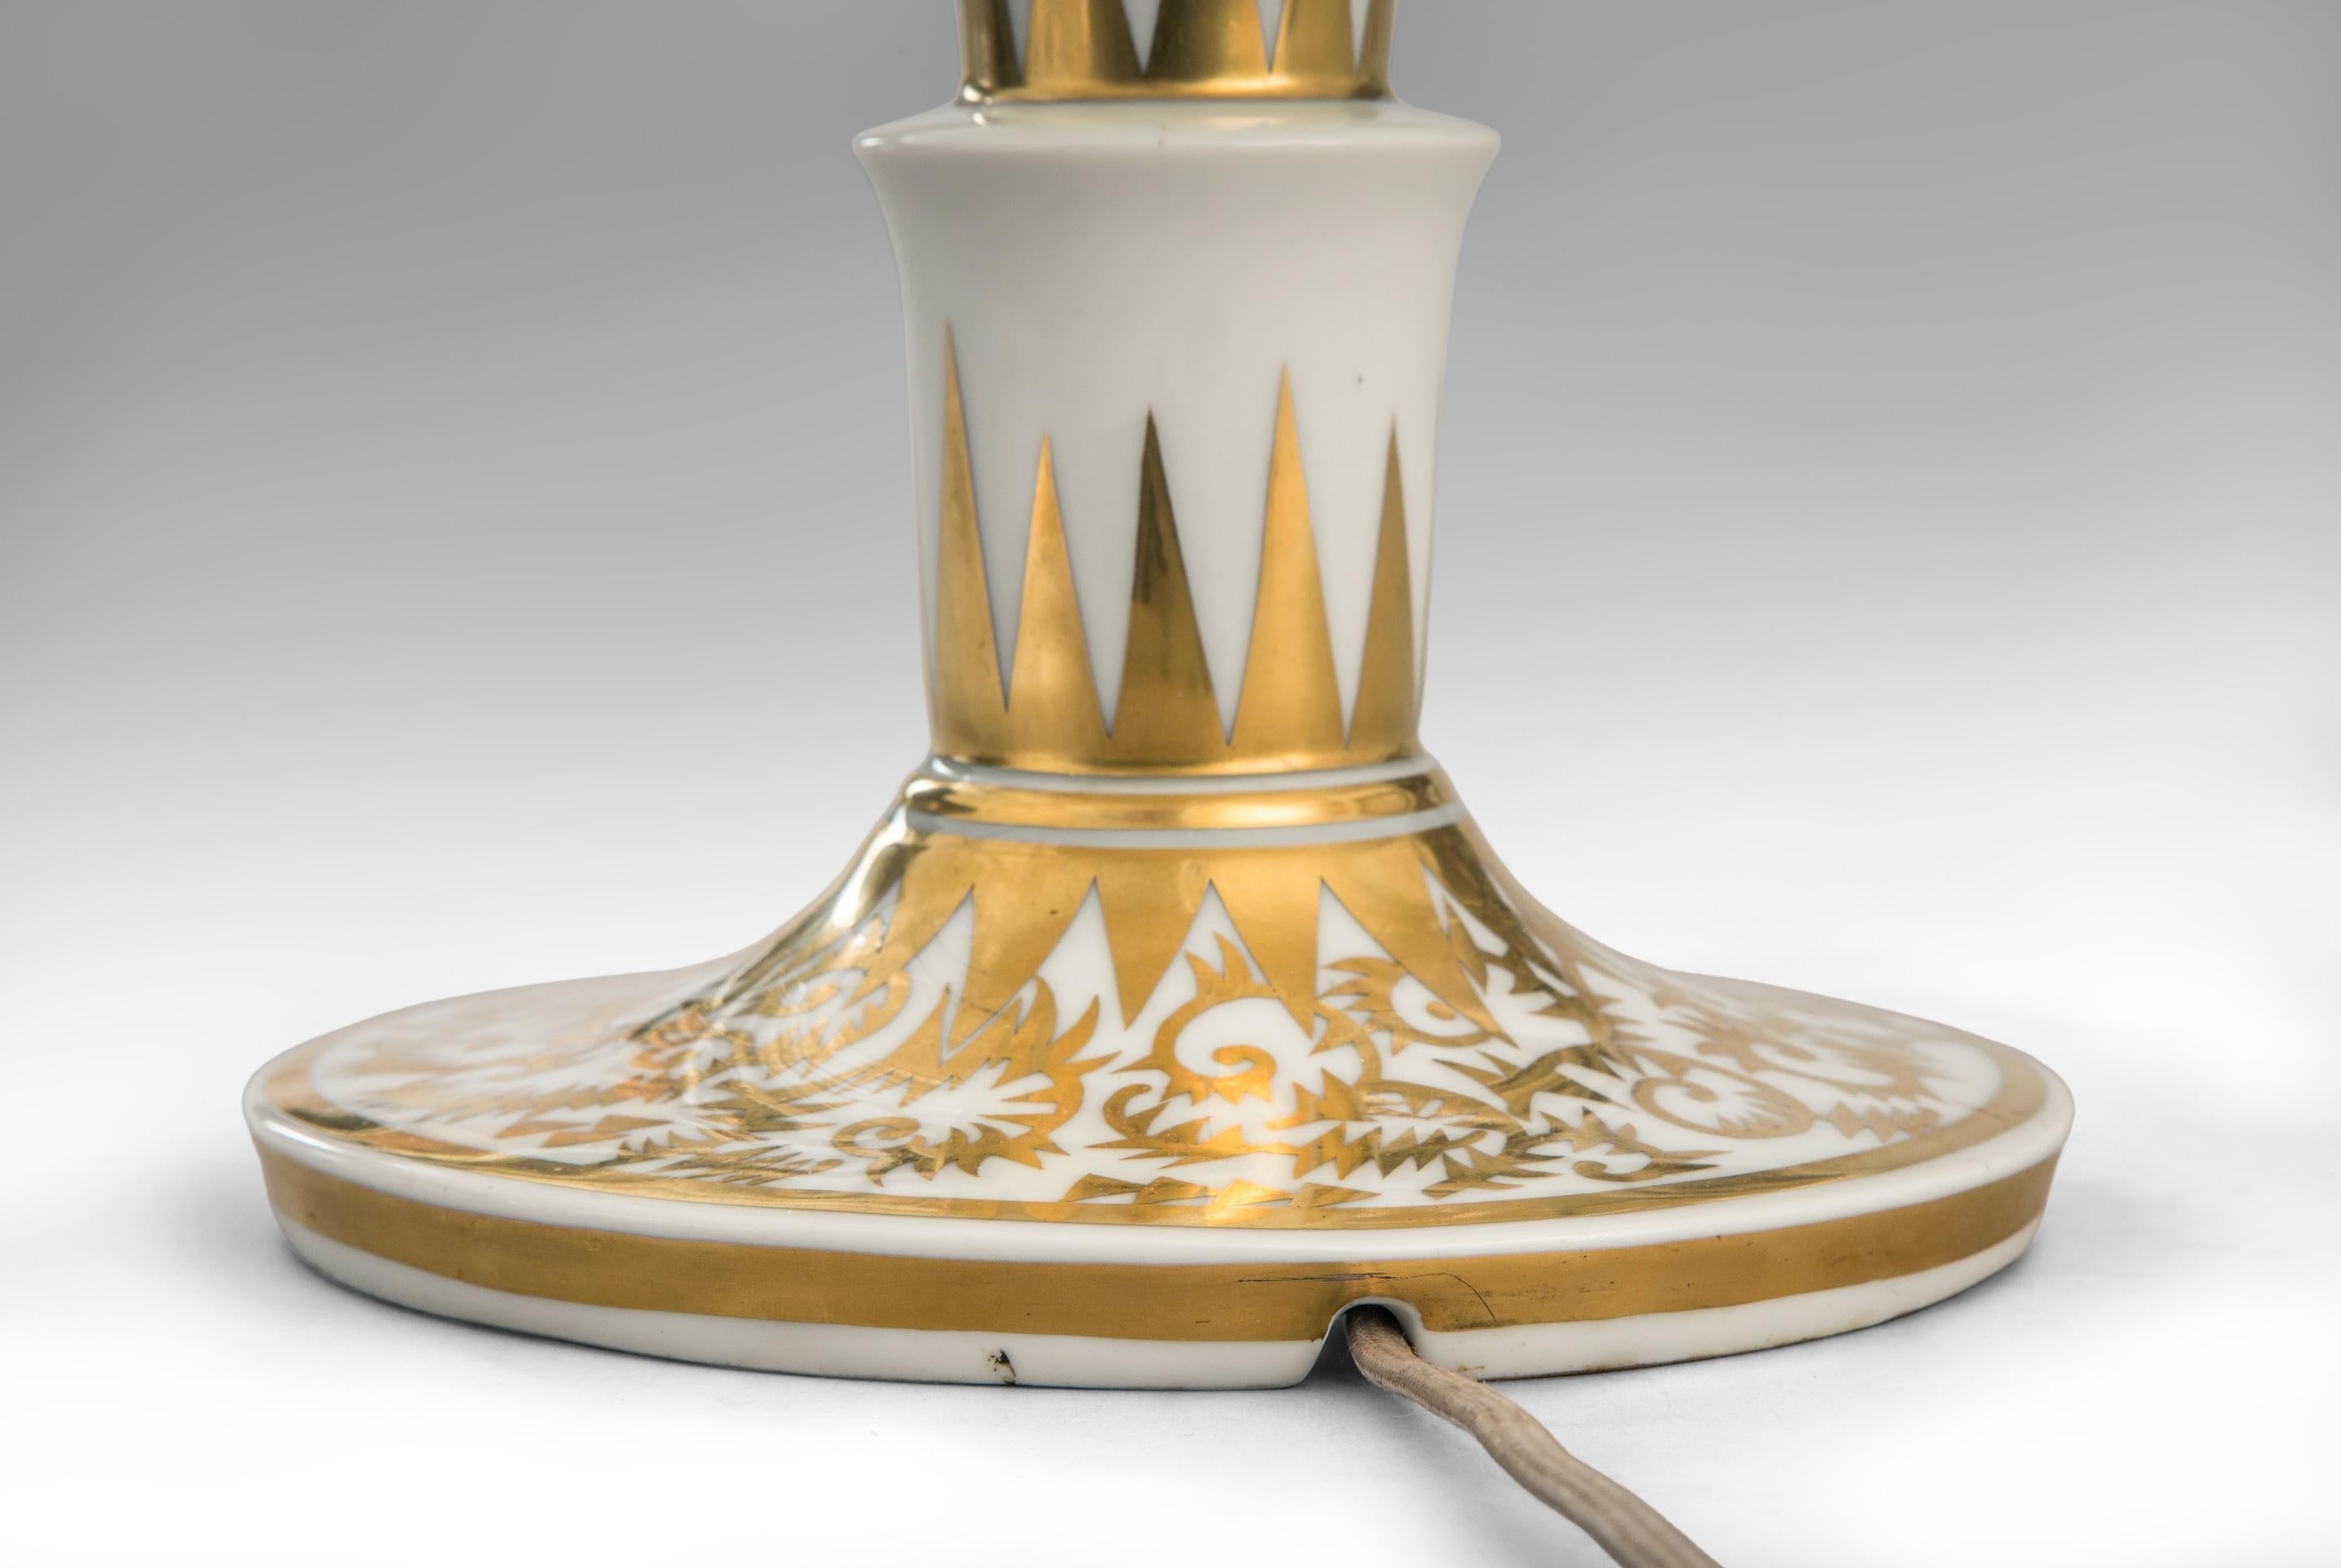 Rosenthal, a German parcel gilt porcelain lamp,
mid-20th century
A limited edition lamp by one of Europe's leading porcelain studios. A column of cascading tiers above the domed circular base, adorned by luxurious parcel gilt decoration in the